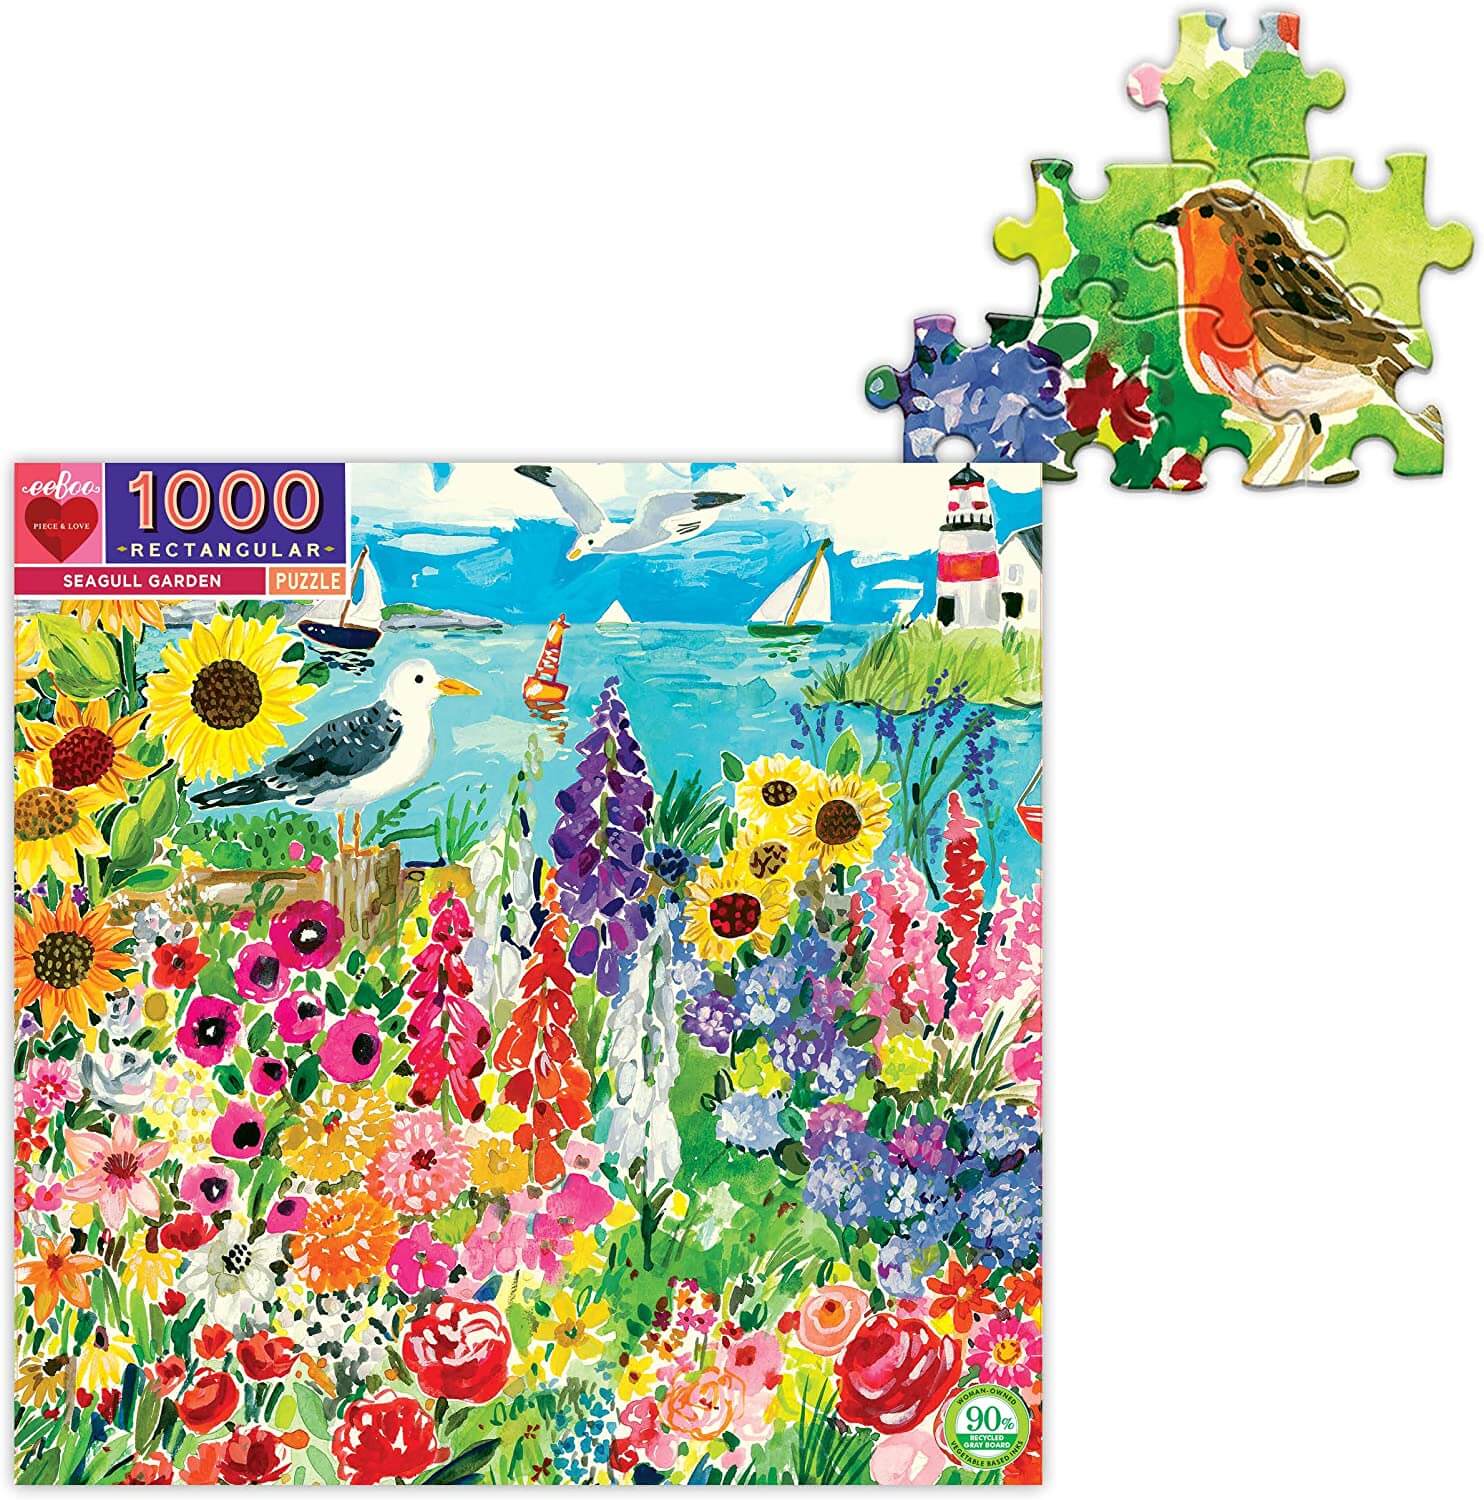 eeBoo - Piece and Love Seagull Garden 1000 Piece Rectangular Adult Jigsaw Puzzle photo of box with completed section of puzzle featuring a bird